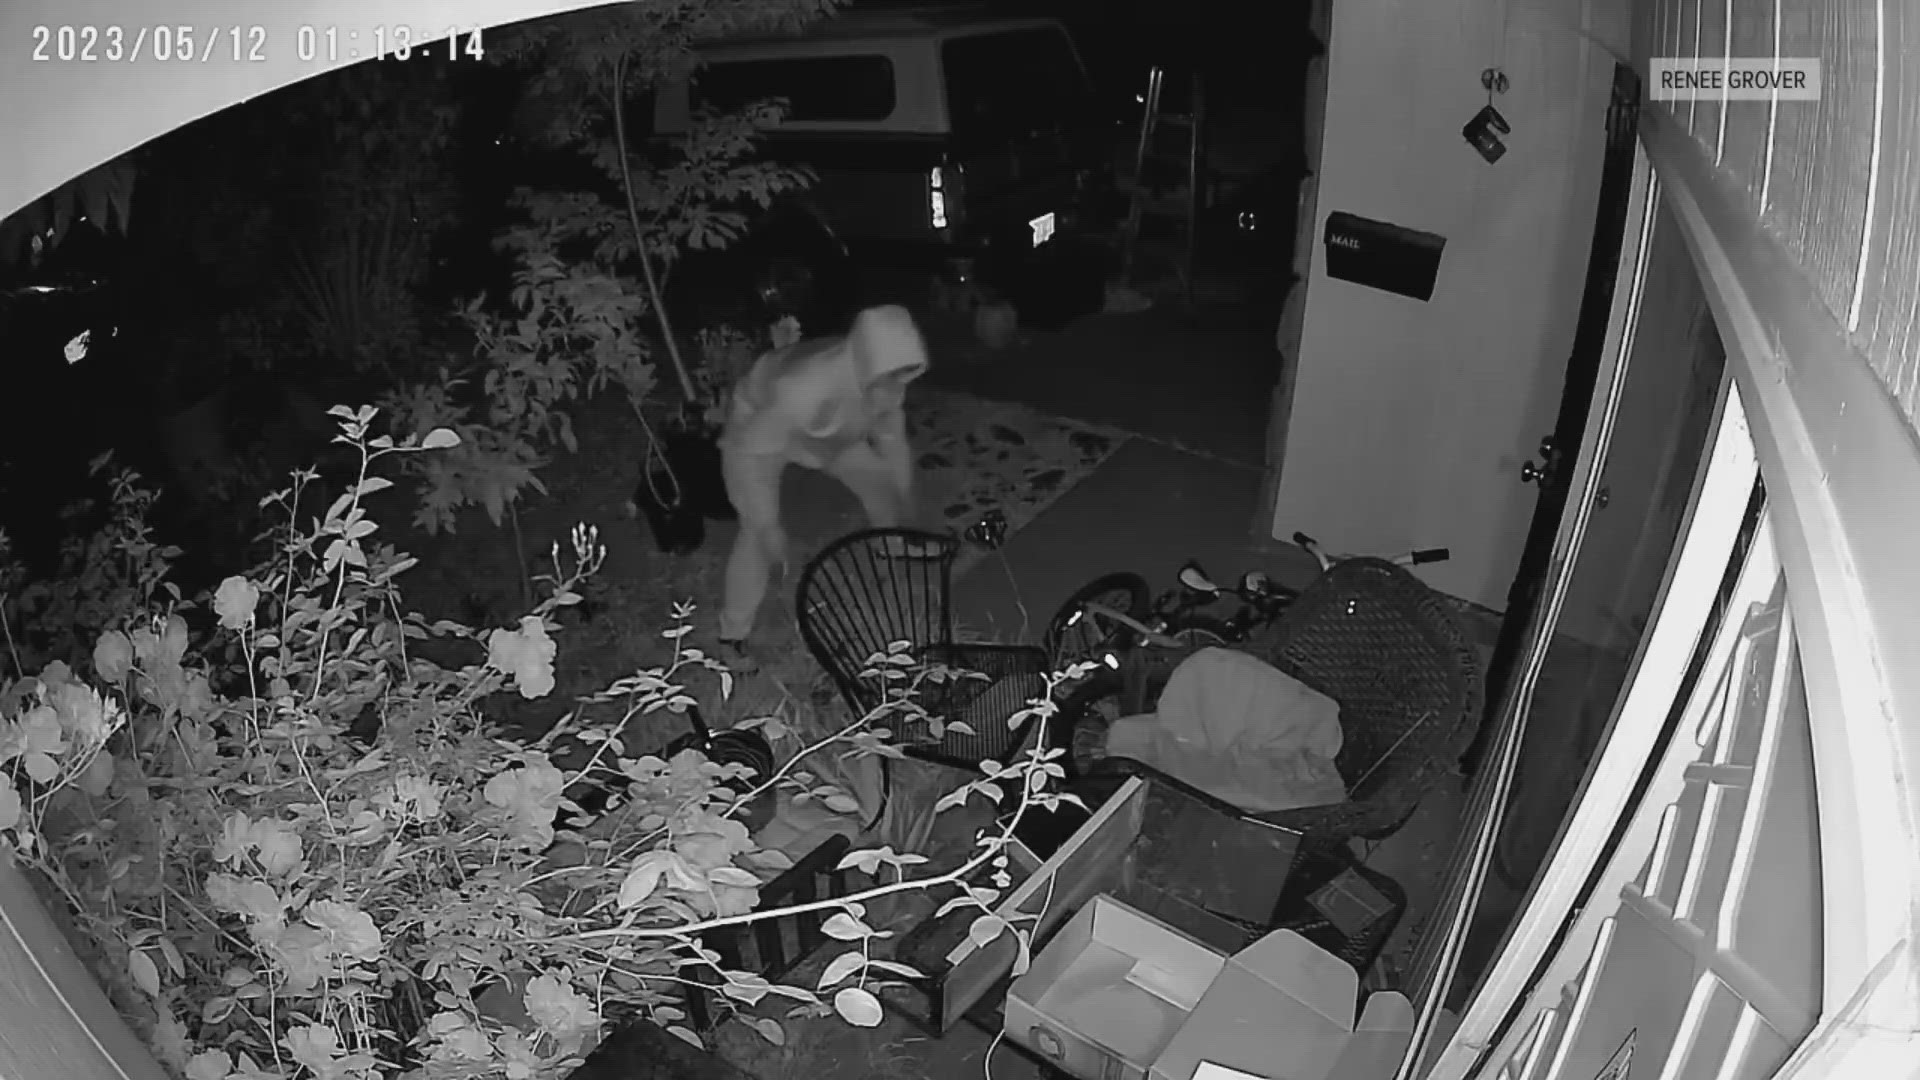 Renee Grover says she and her family are unable to sleep after a person was caught on camera in their front patio at 1 a.m. Friday morning, chasing their cat.